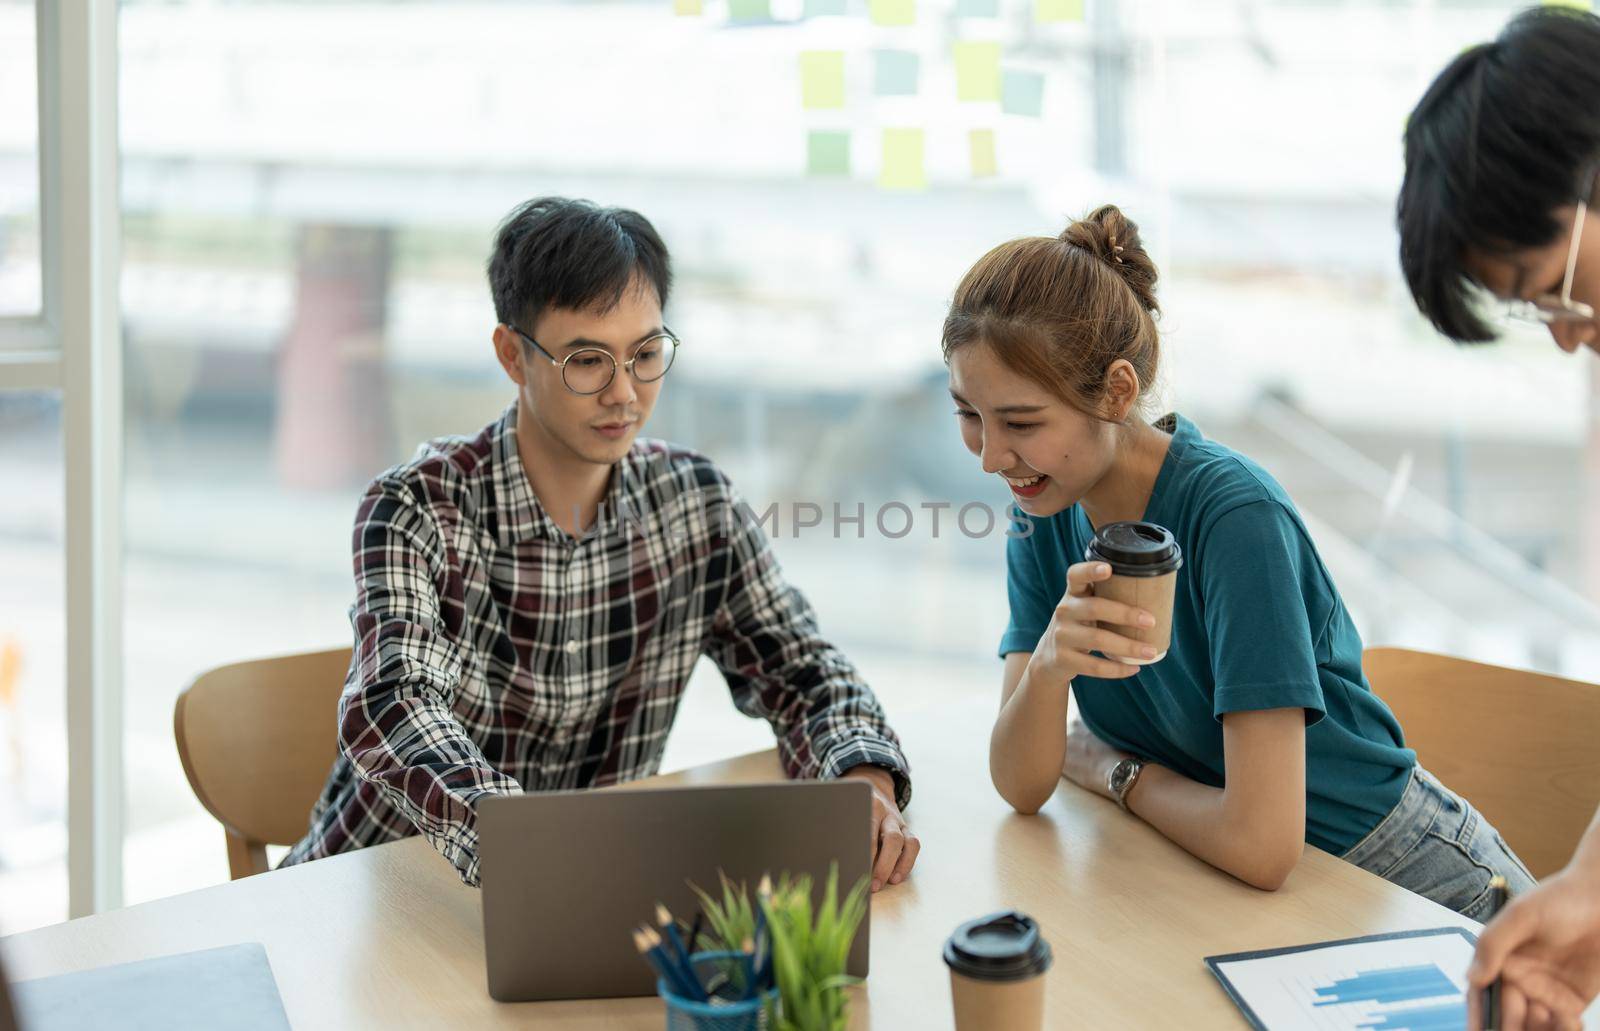 Young Asian woman leading business creative team in mobile application software design project. Brainstorm meeting, work together, internet technology, girl power, office coworker teamwork concept.